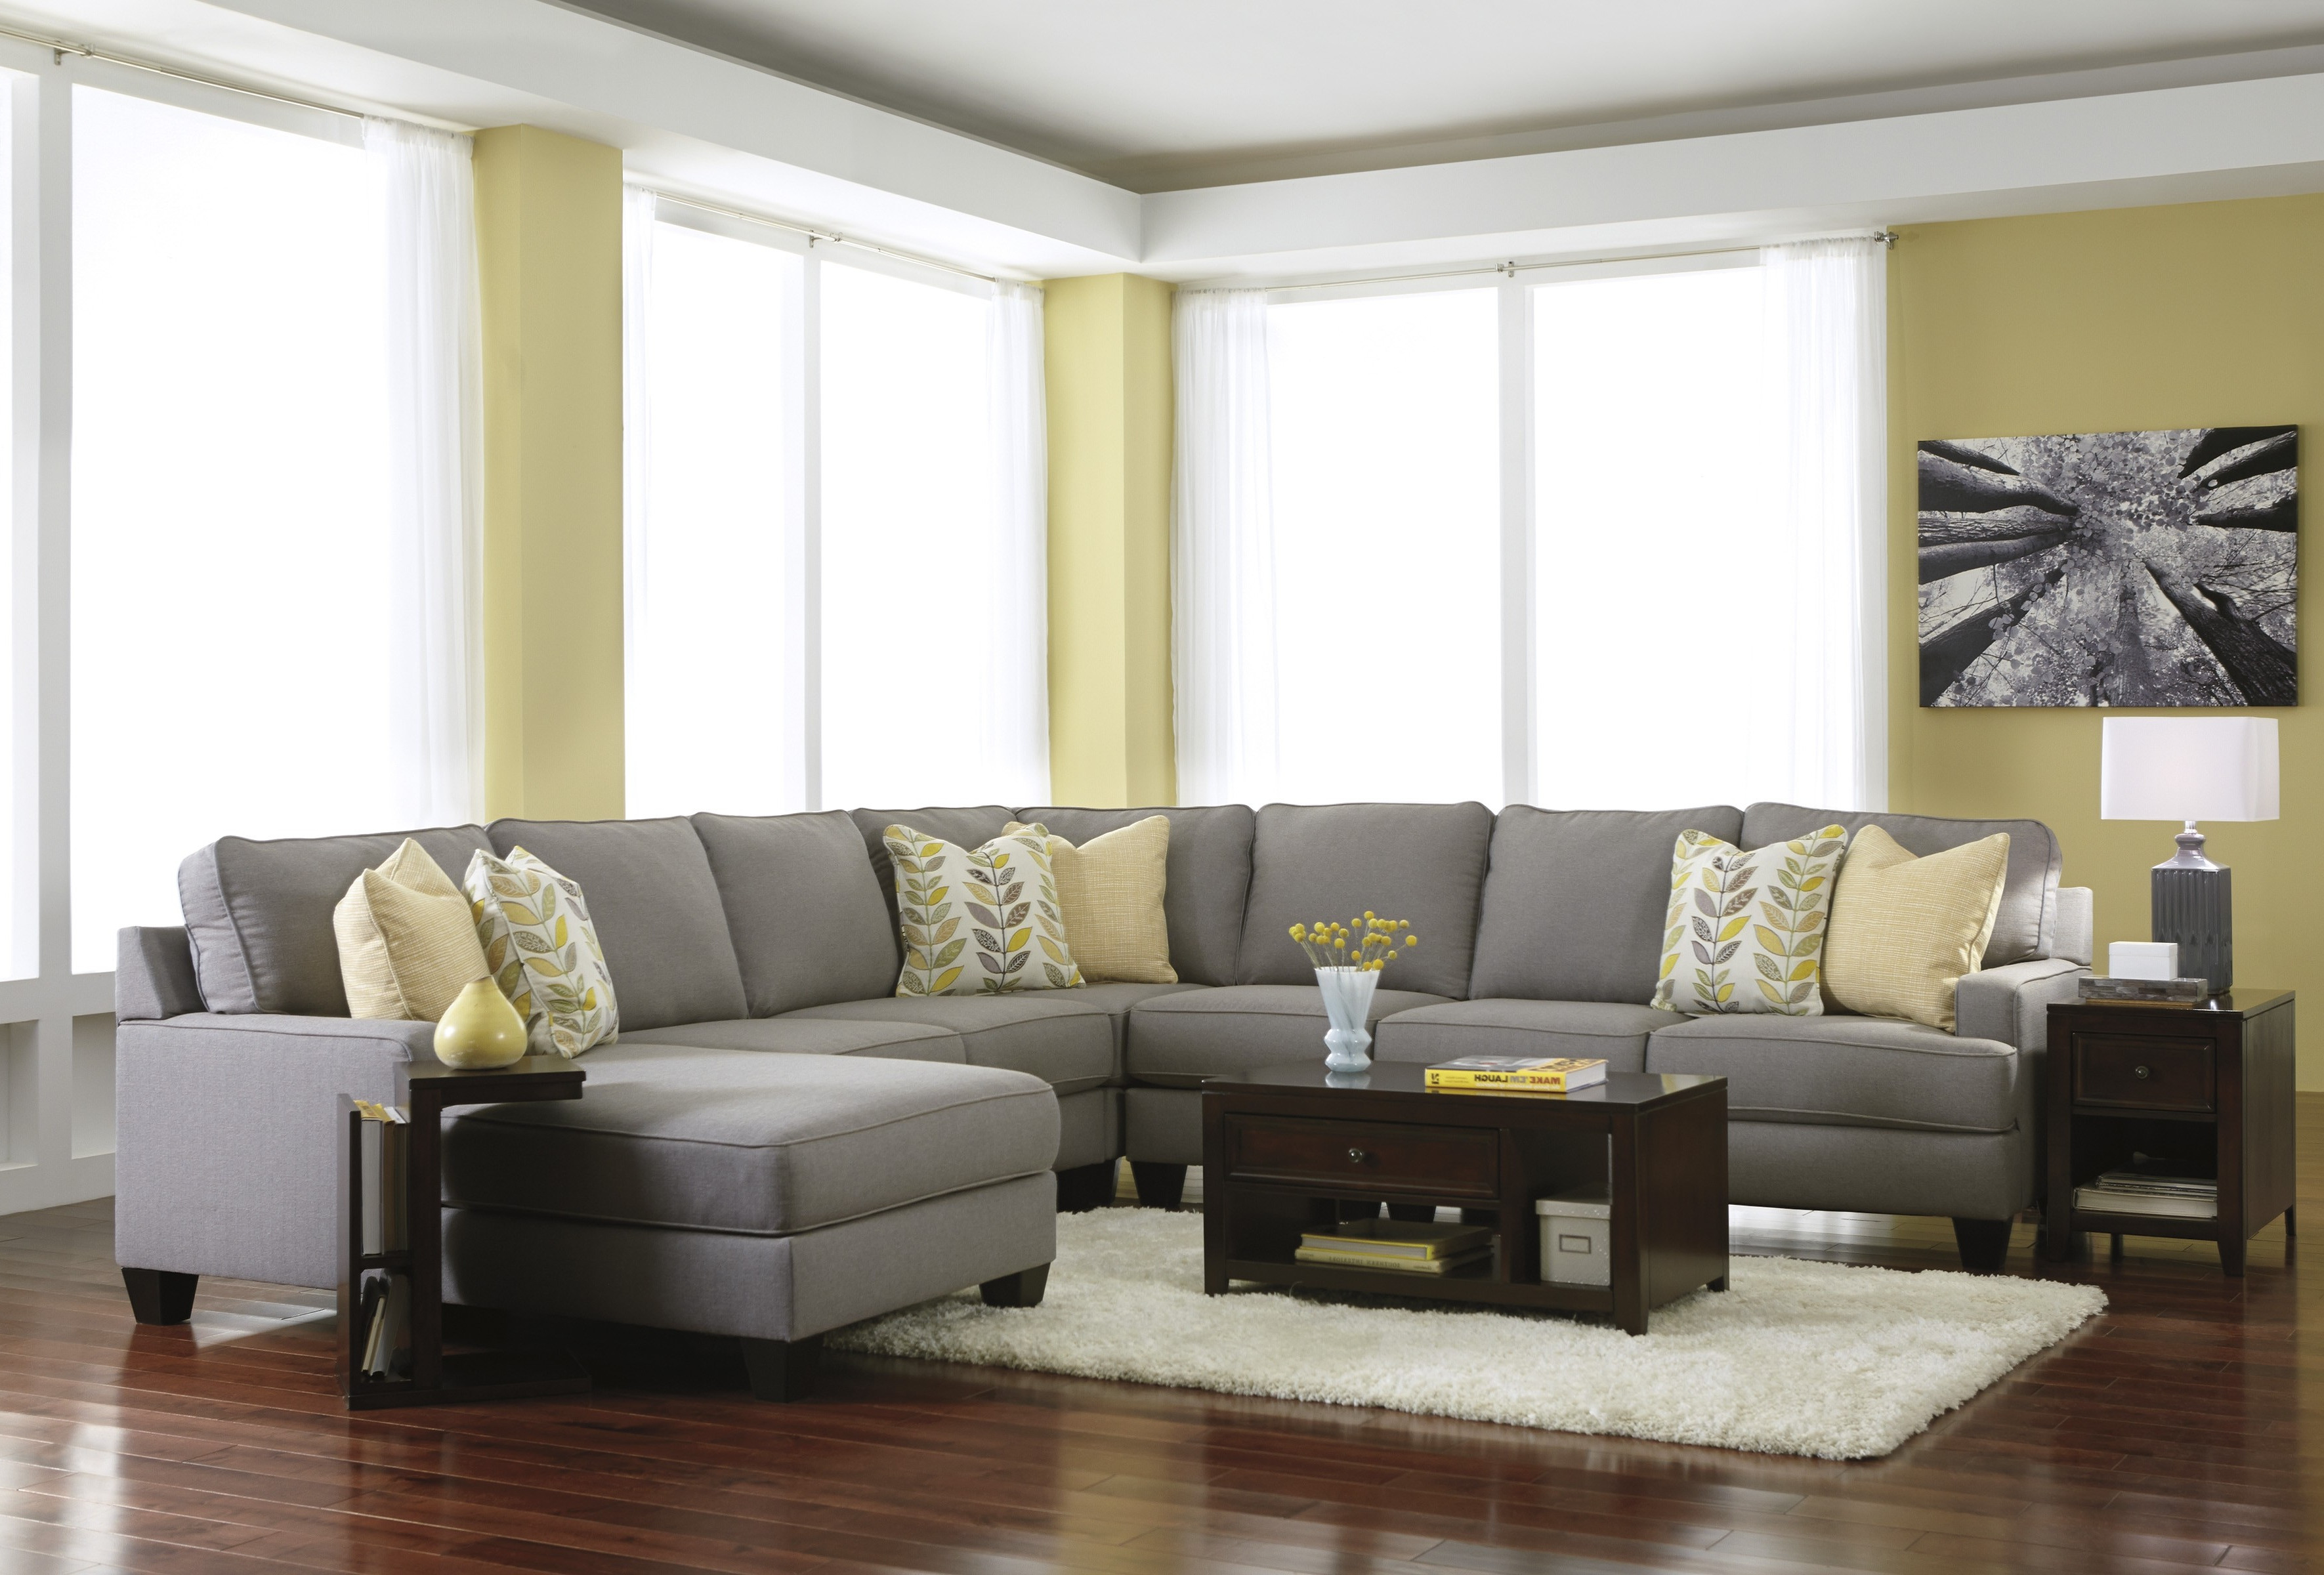 furniture sectionals living room